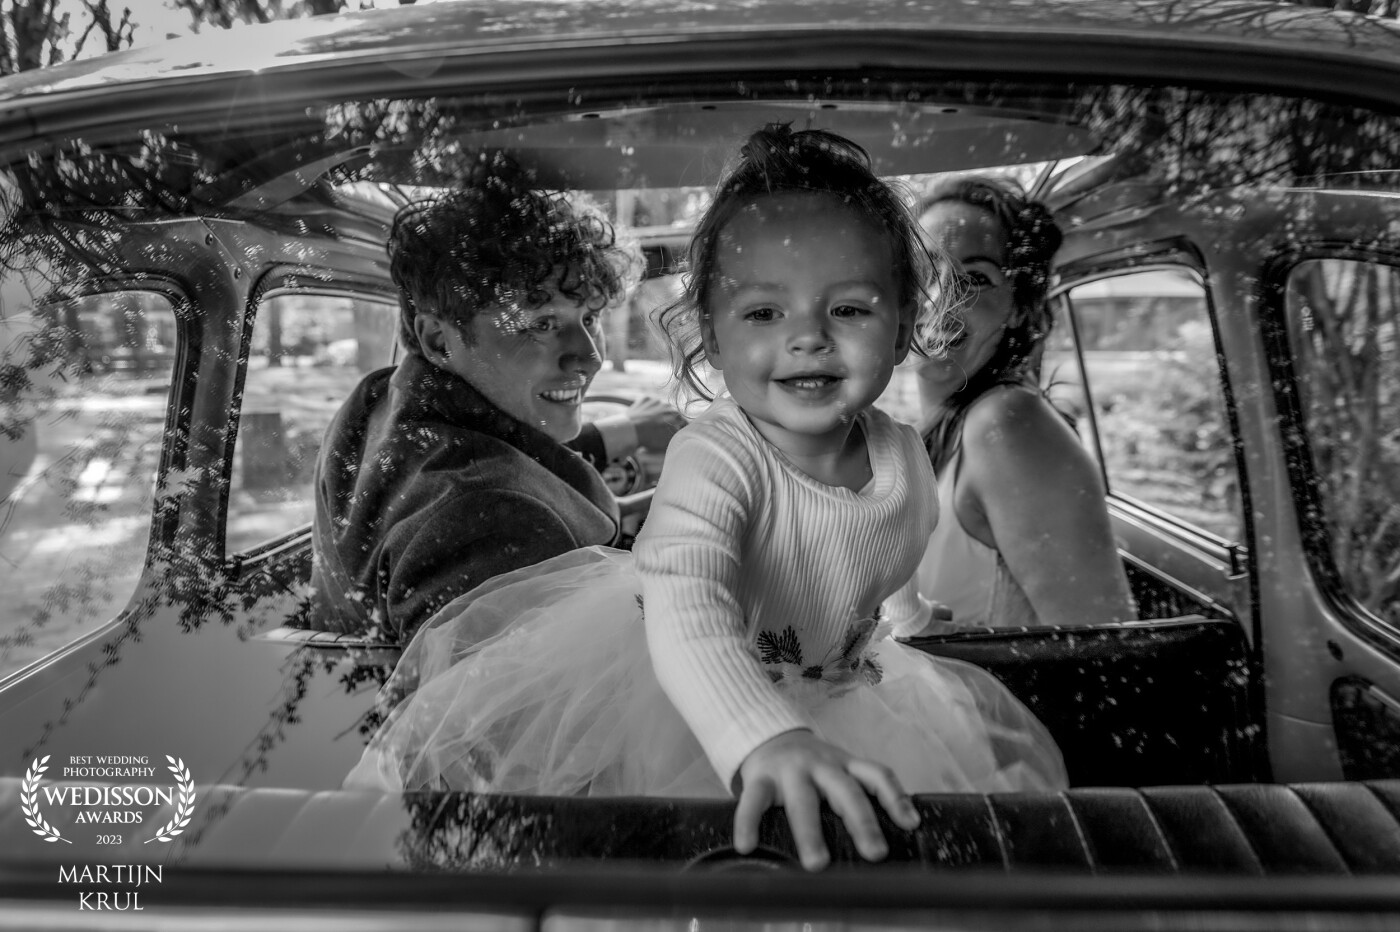 The connection between the bride and groom, as well as their precious daughter.<br />
The little girl playfully engaged with the camera, leading to this delightful result.